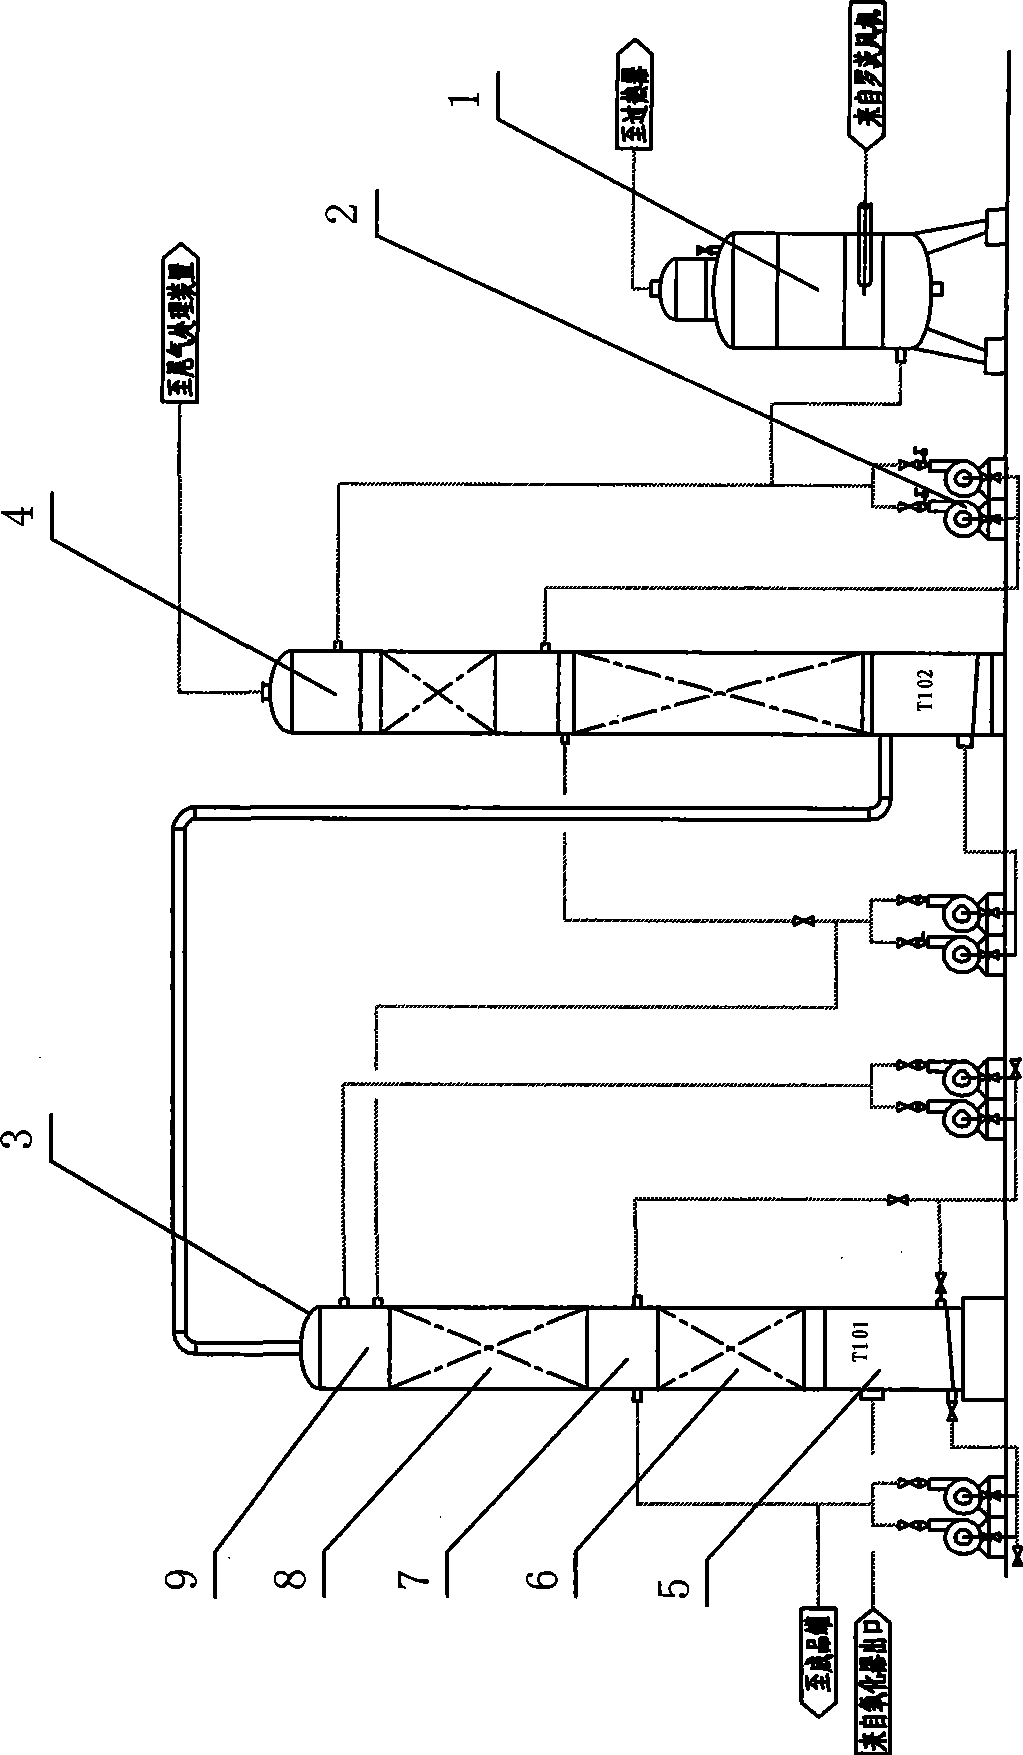 Process and apparatus for preparing methanal with low transformational cycle method